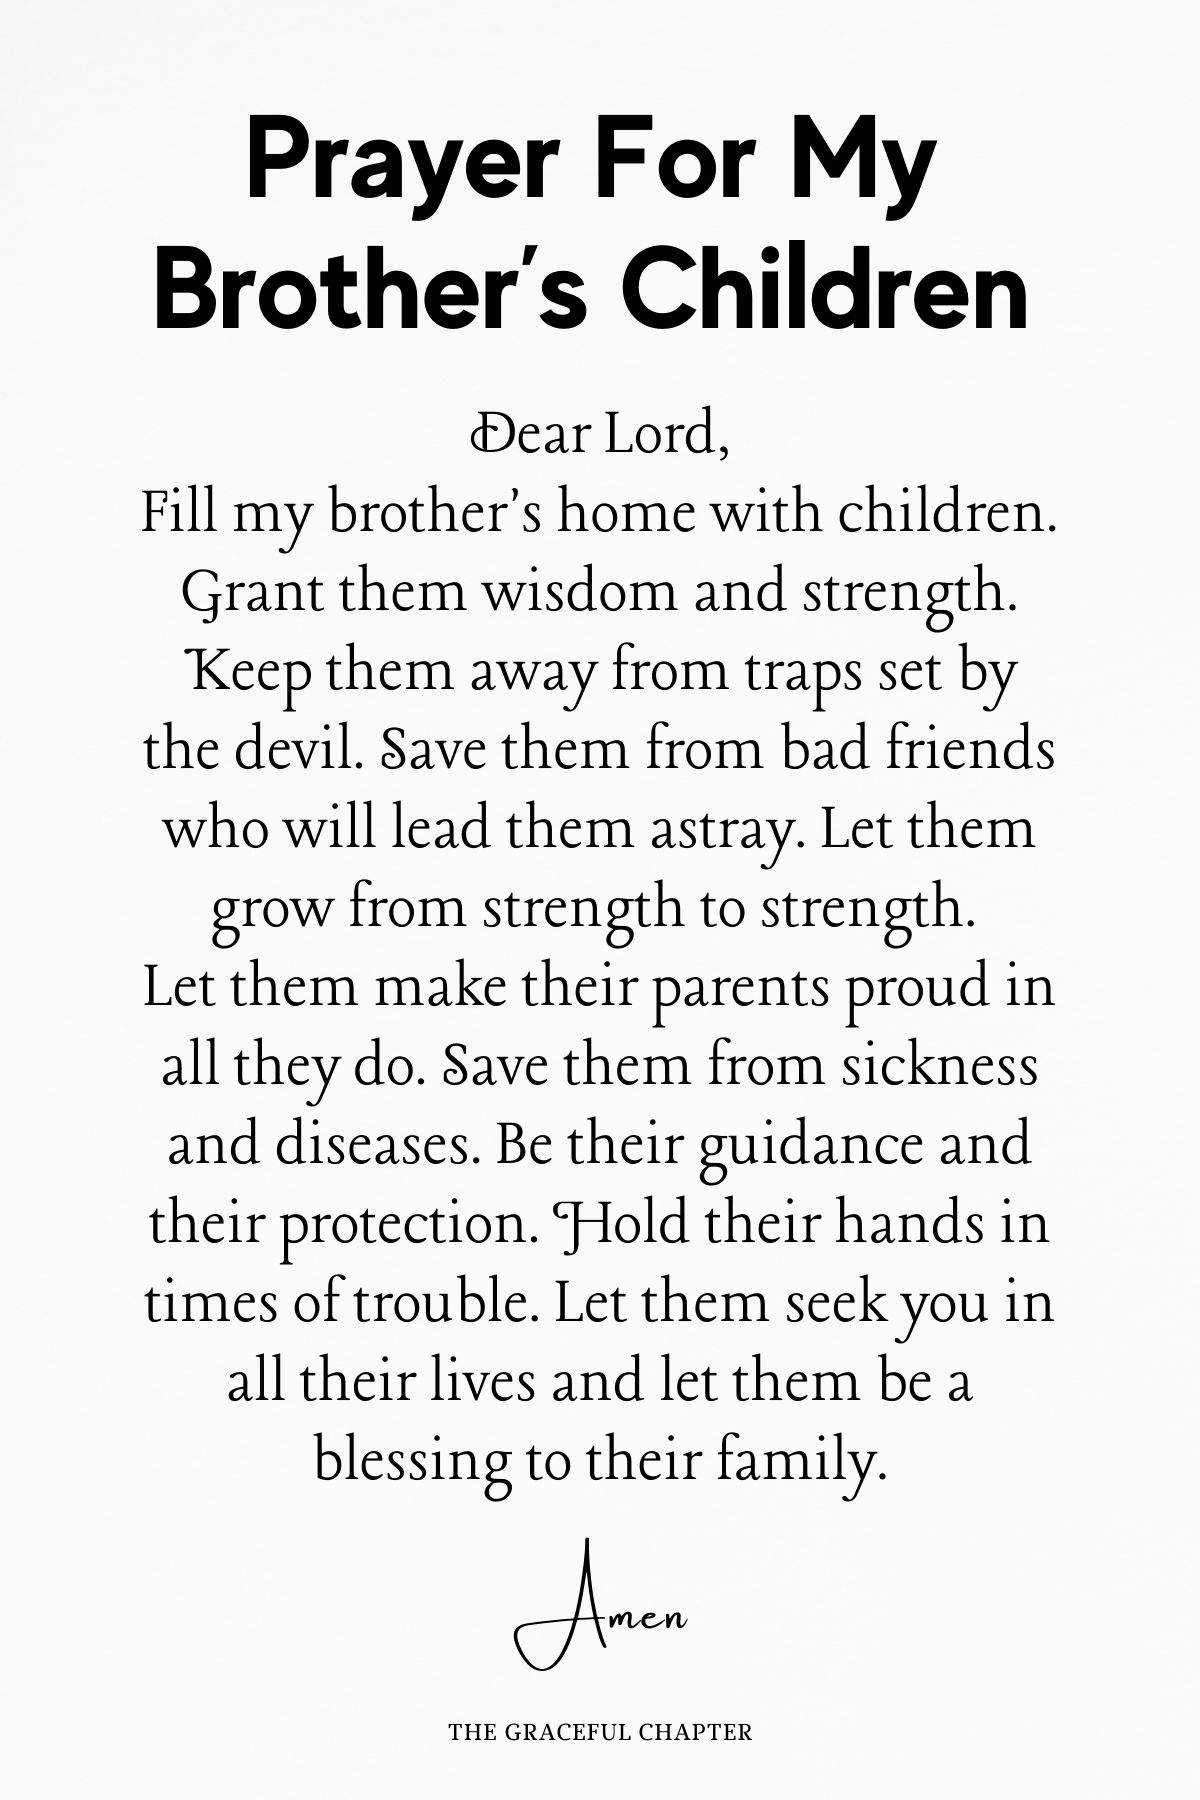 Prayer for my brother’s children - Prayers for my brother